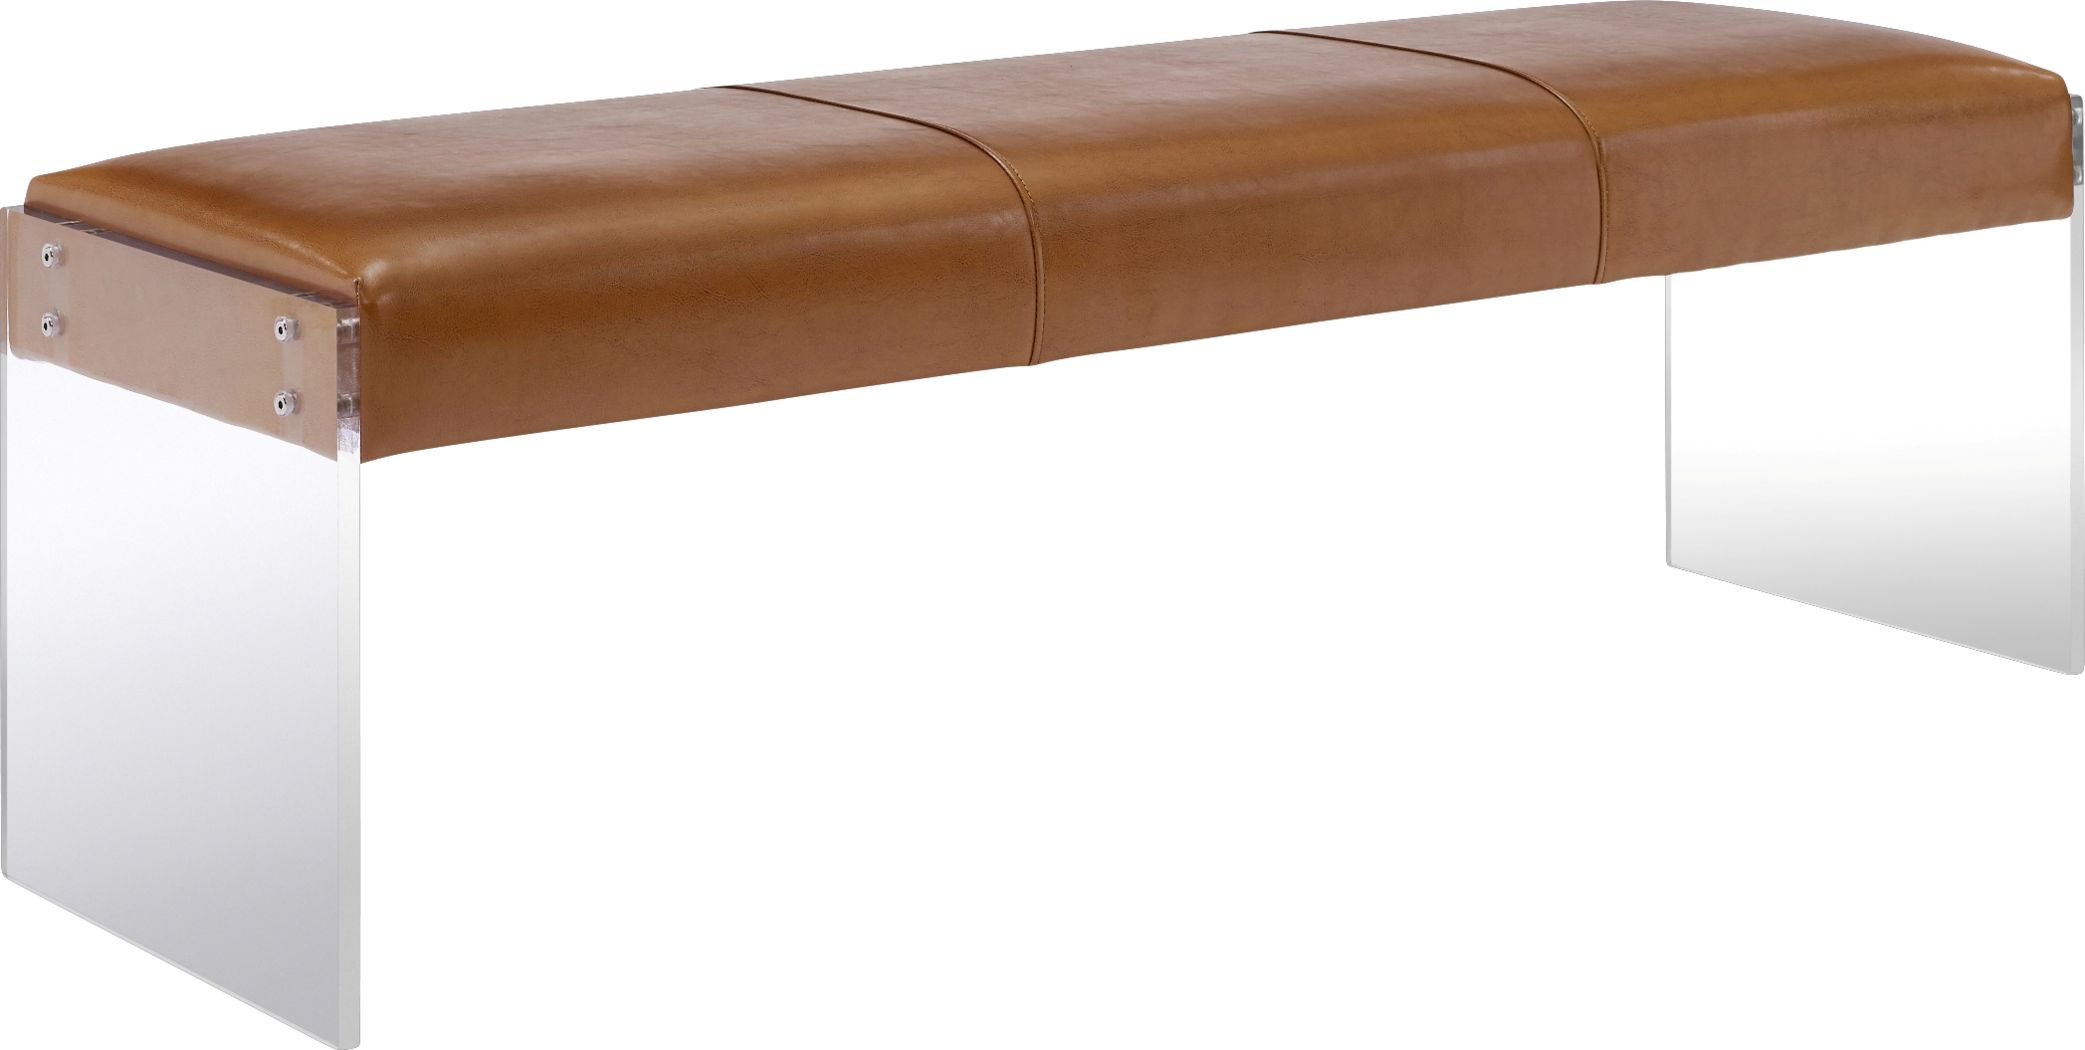 Modern Leather Bench Seats, Modern Leather Benches